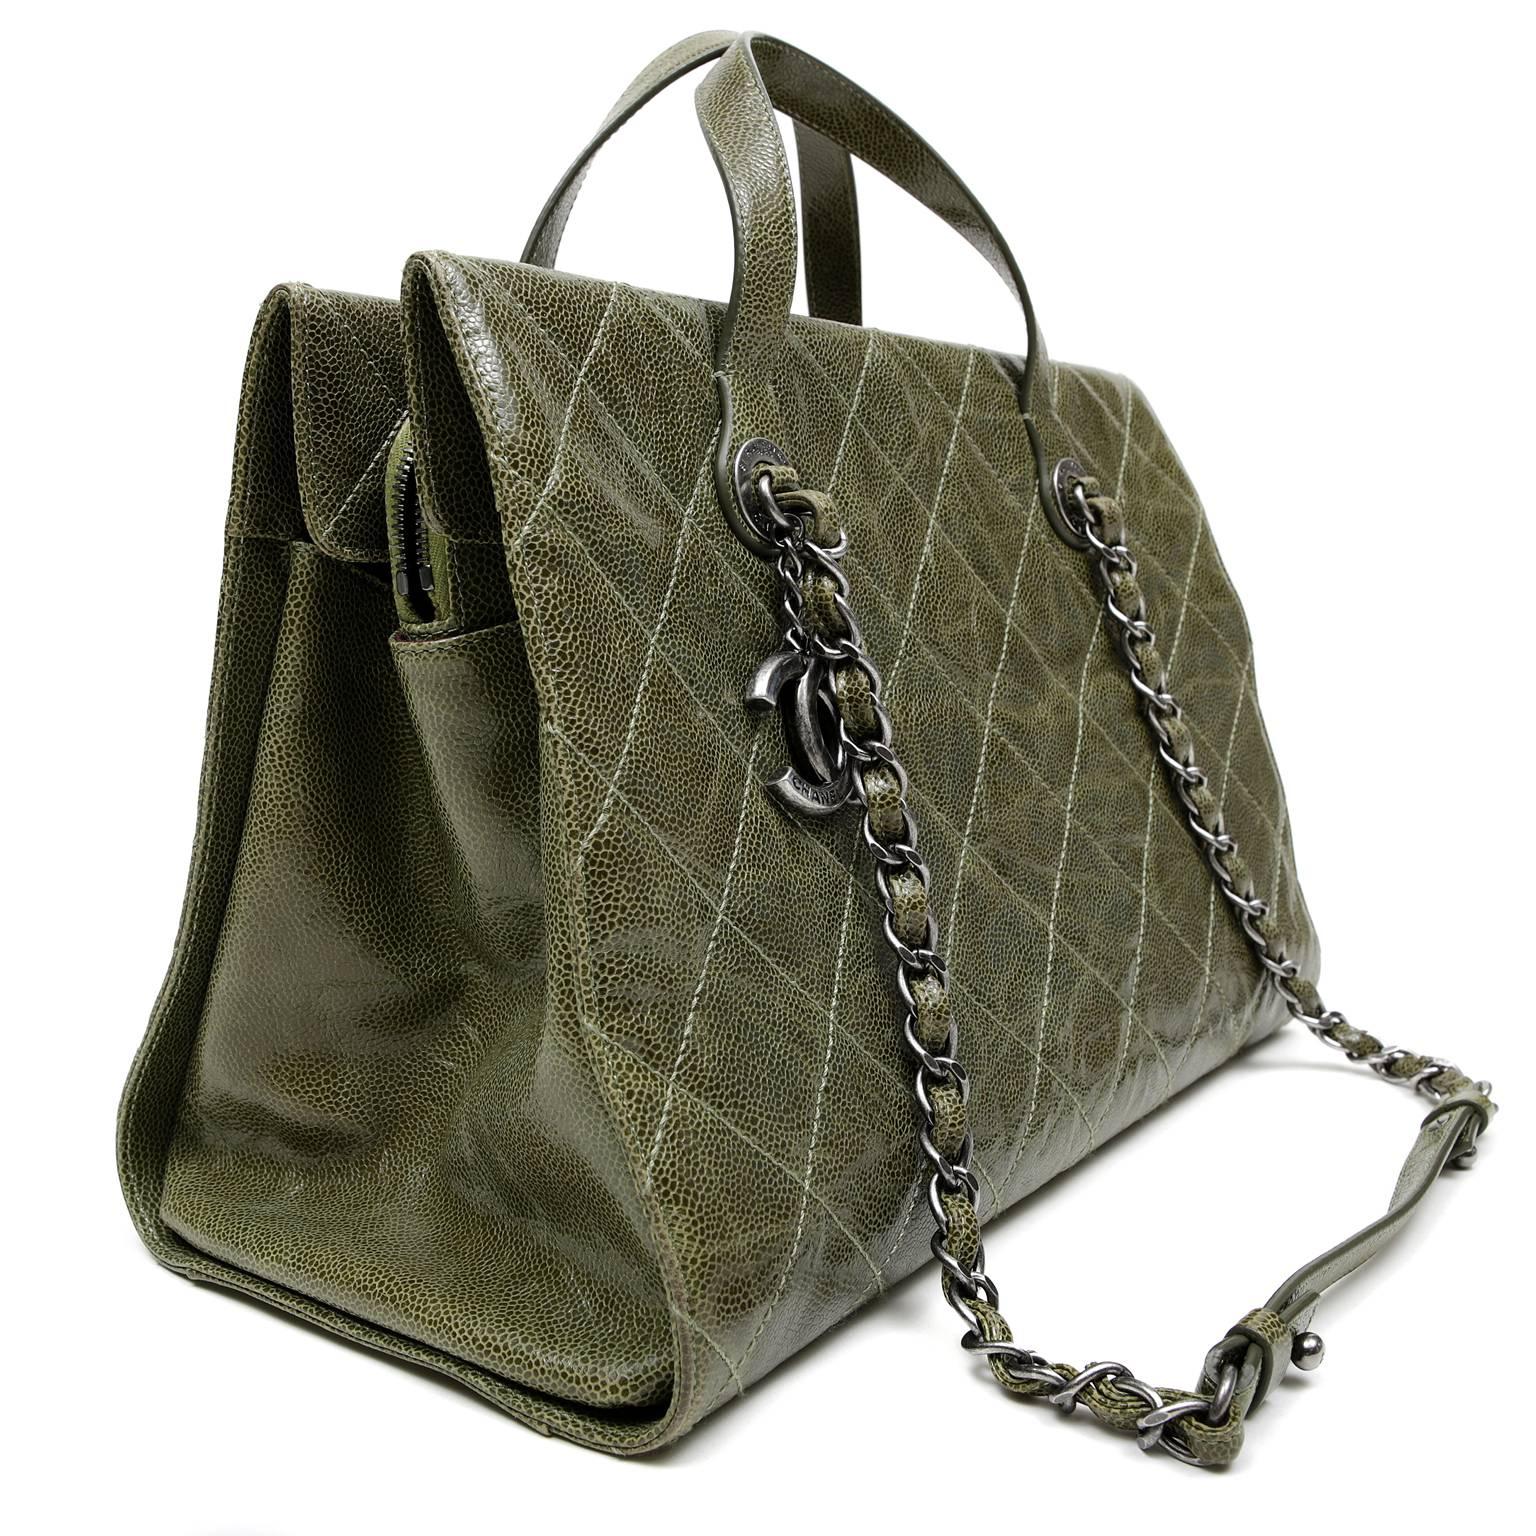 Chanel Olive Caviar Crave Tote- PRISTINE
  Very sophisticated, this structured tote can be worn for a variety of purposes.  
Neutral olive green caviar leather is textured and durable.  Signature Chanel diamond stitched pattern with edgy ruthenium